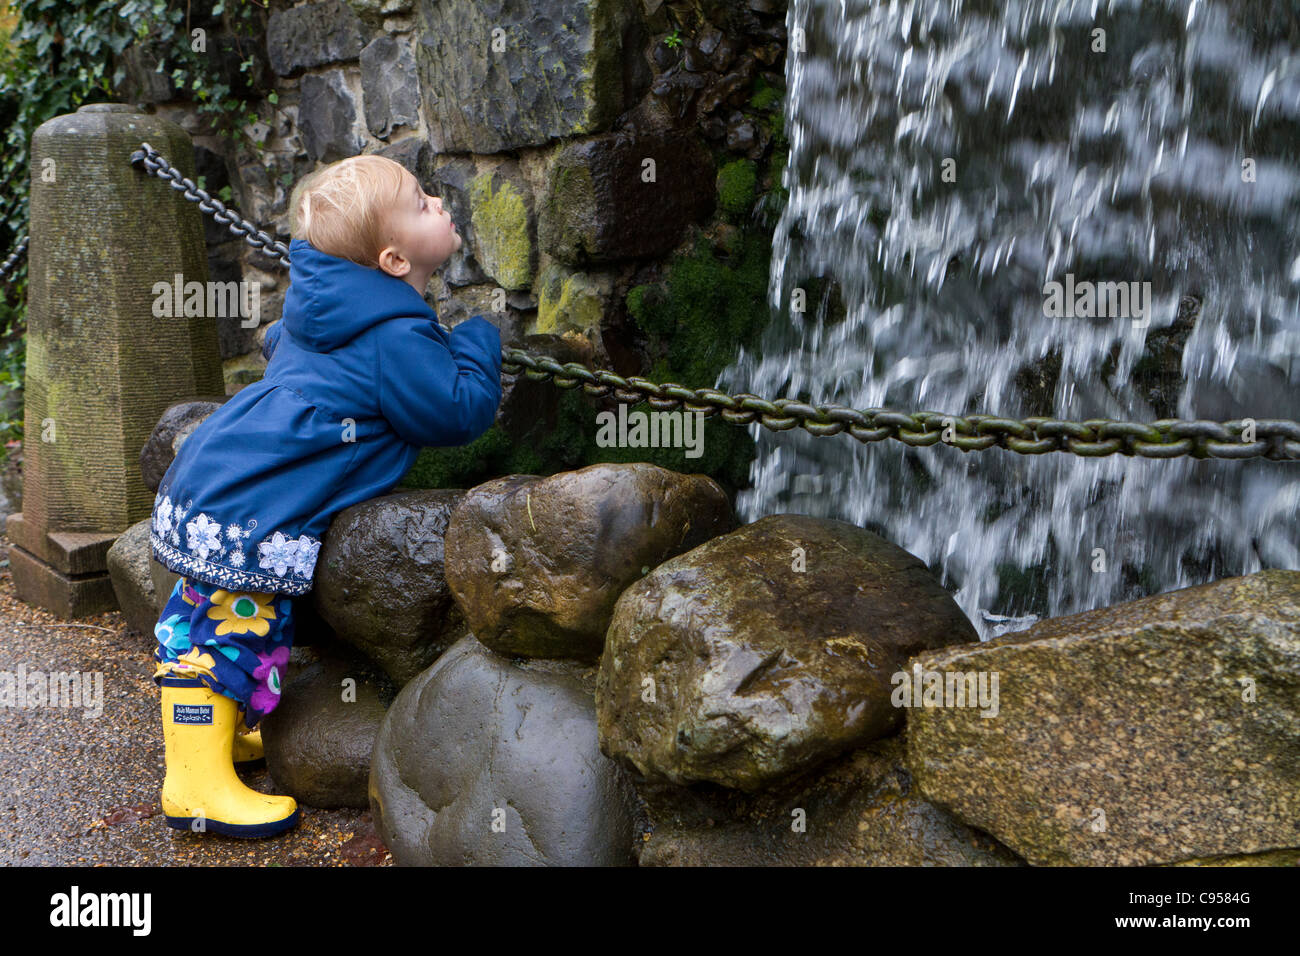 Small child in blue coat and yellow wellington boots leaning on a chain and gazing intently at an artificial waterfall. Stock Photo